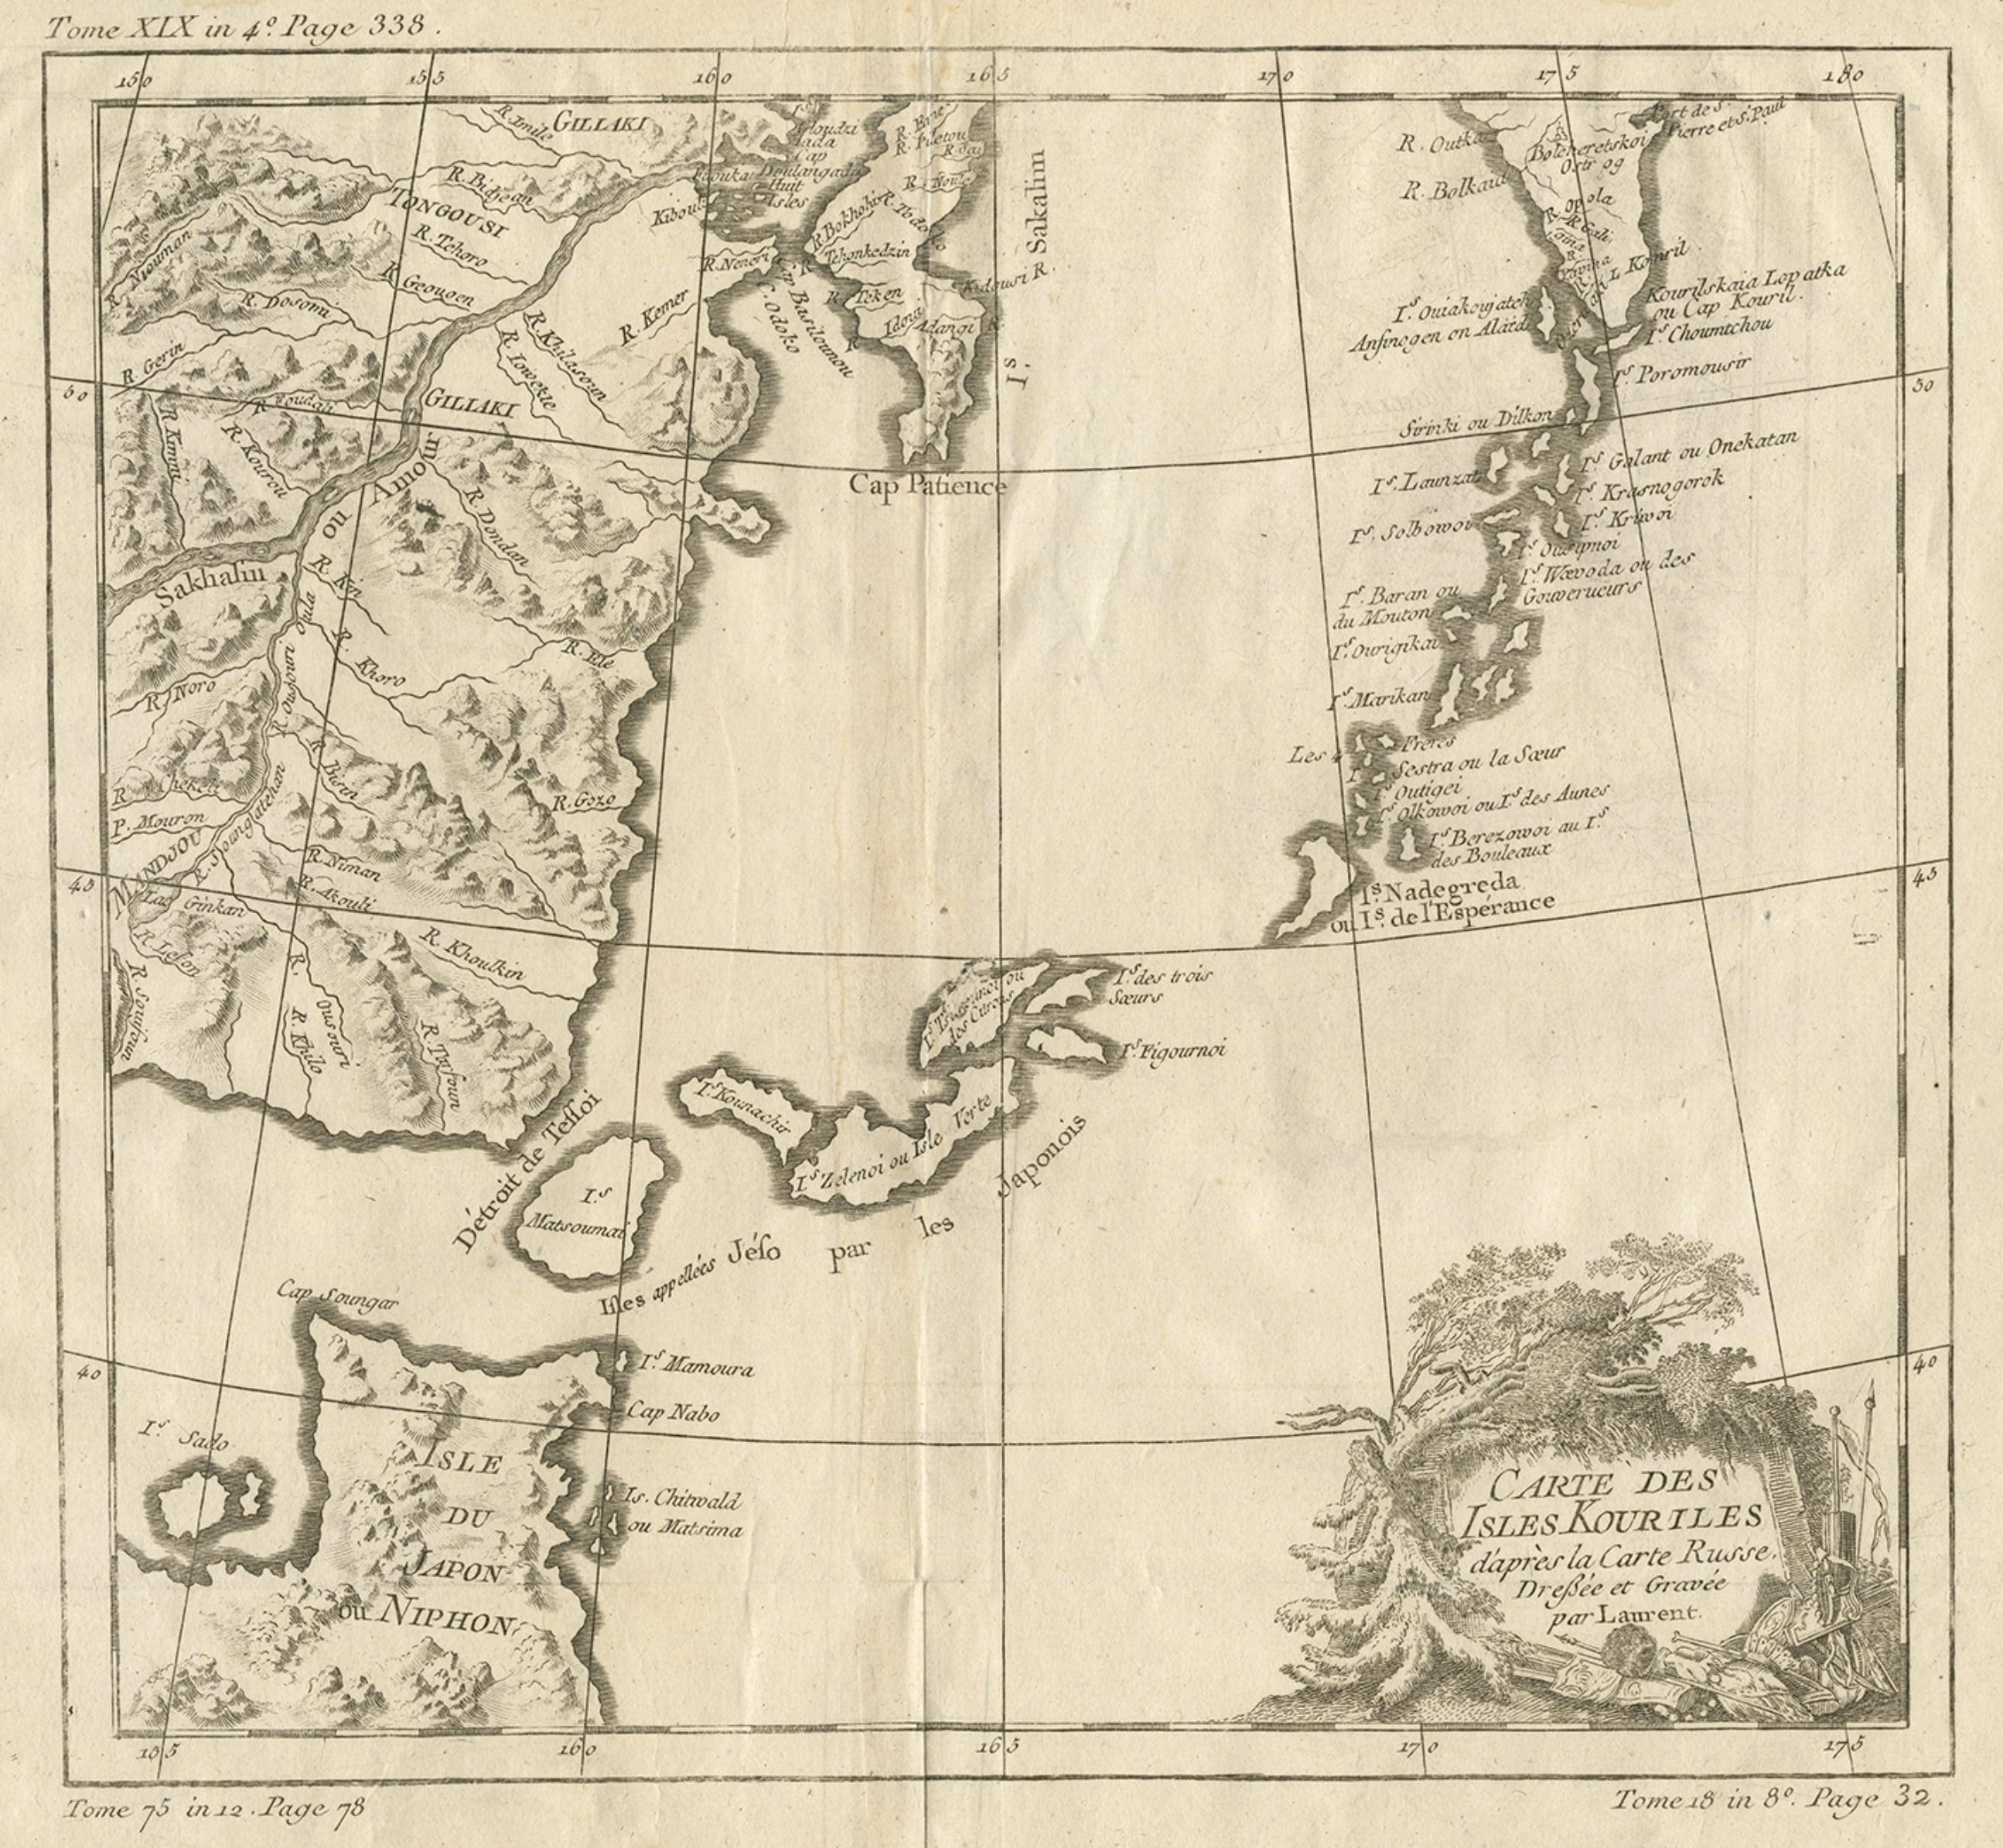 Engraved Old Map of The Kurile Islands, from Hokkaido, Japan to Kamchatka, Russia, c.1750 For Sale